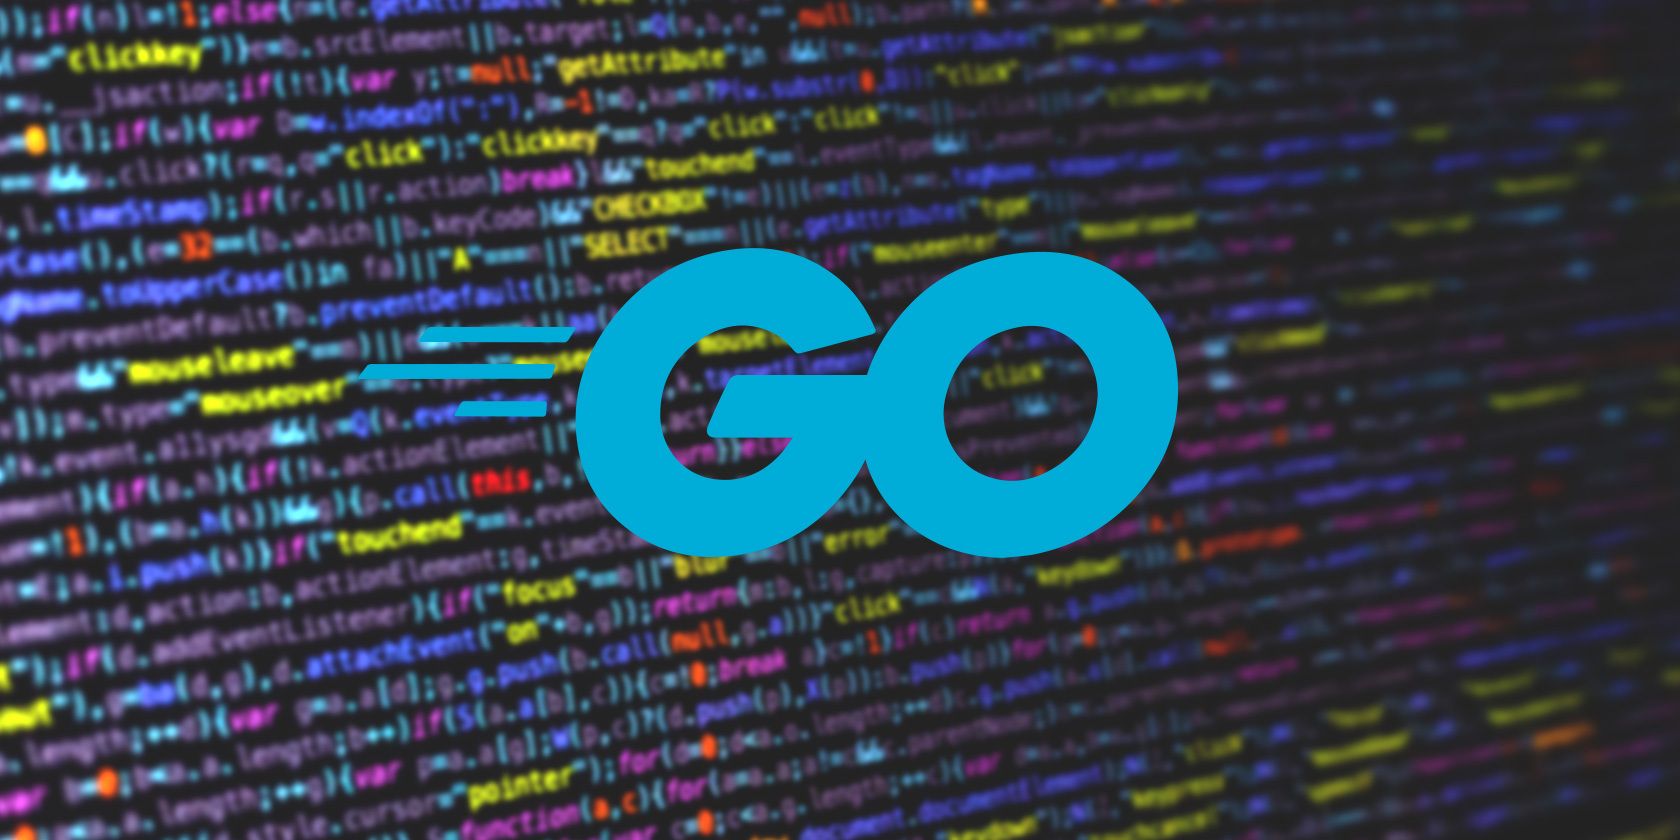 golang logo on a code background